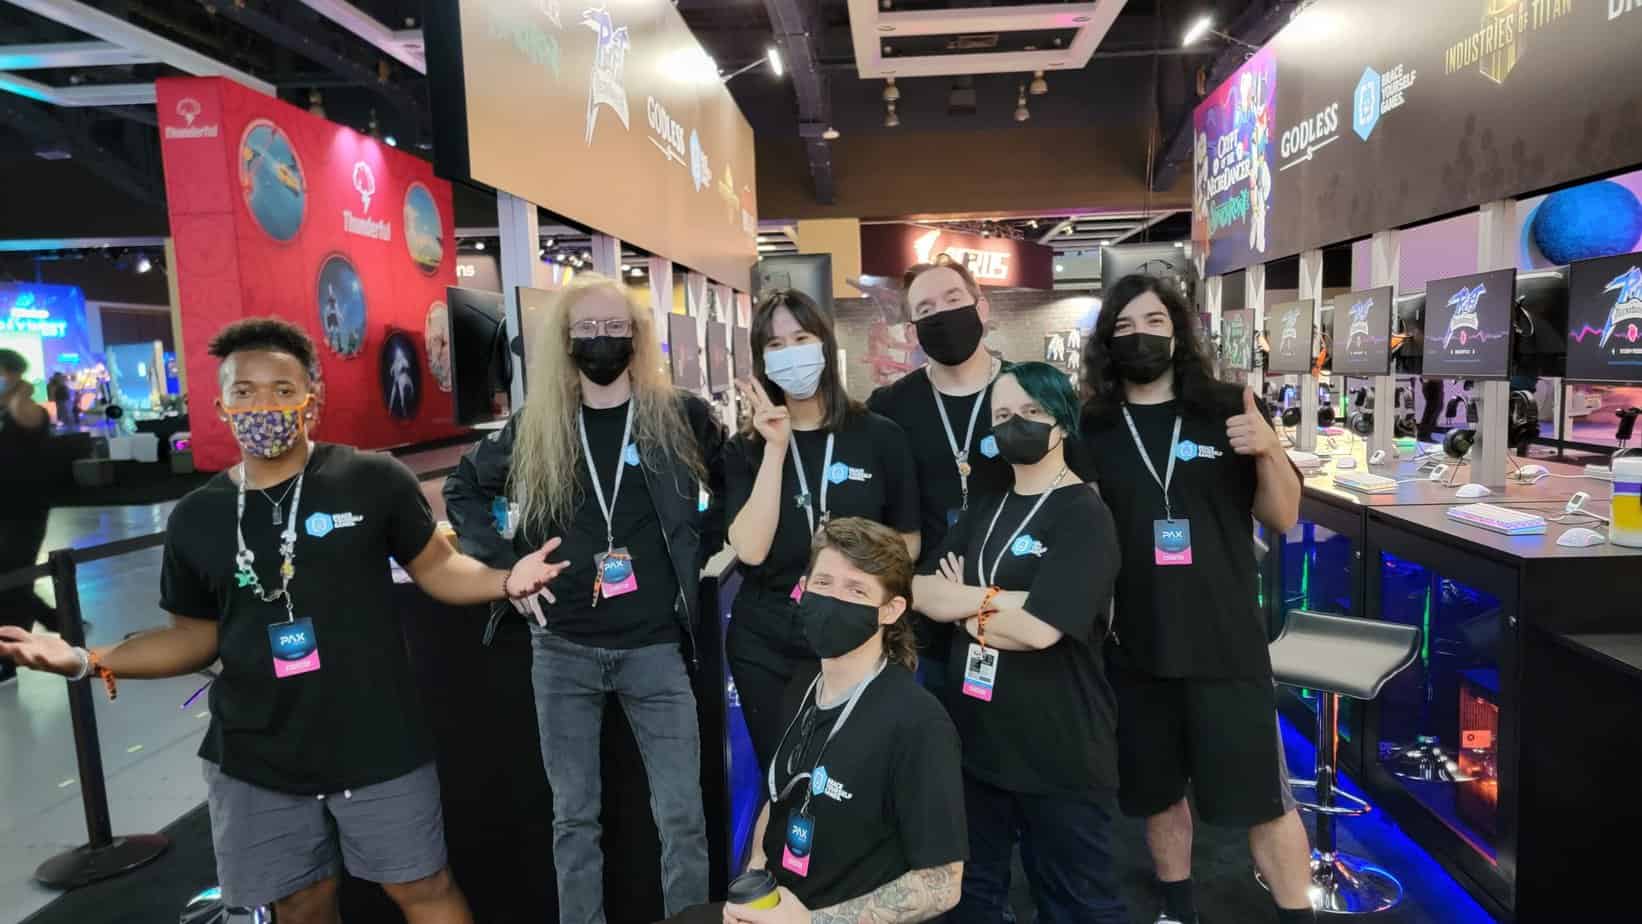 A photo of the Novy Unlimited team together at PAX West 2022.